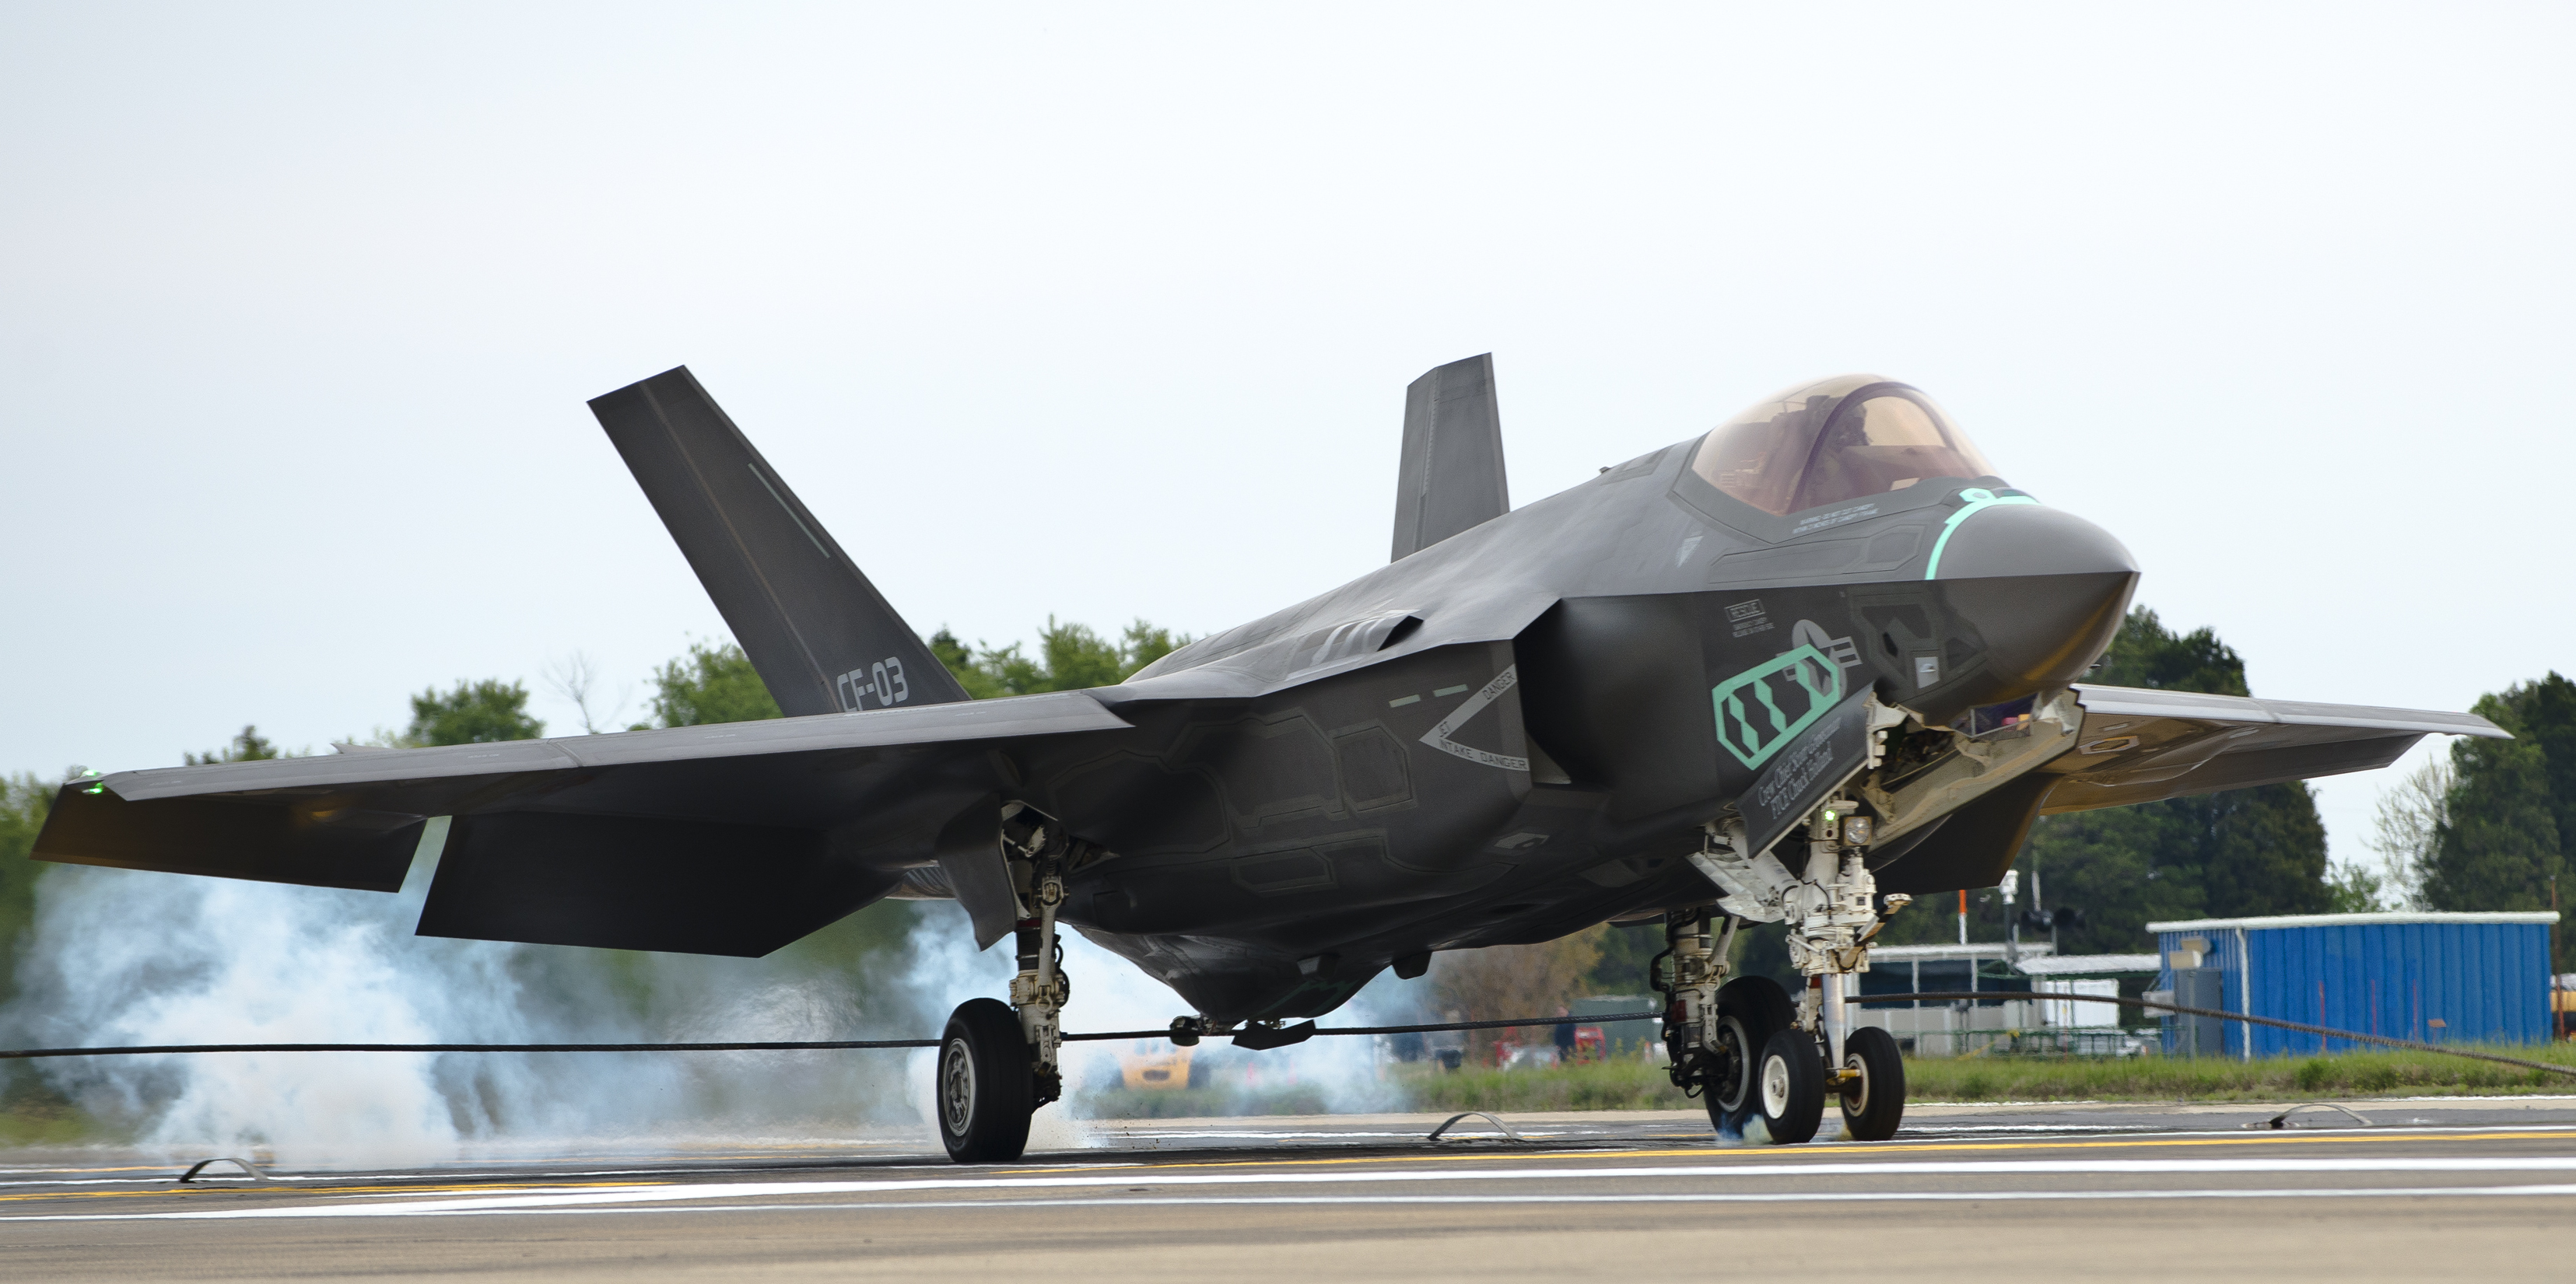 An F-35C Lightning II aircraft makes an arrested landing during a test flight at Naval Air Station Patuxent River, Md. on May 7, 2014. US Navy Photo